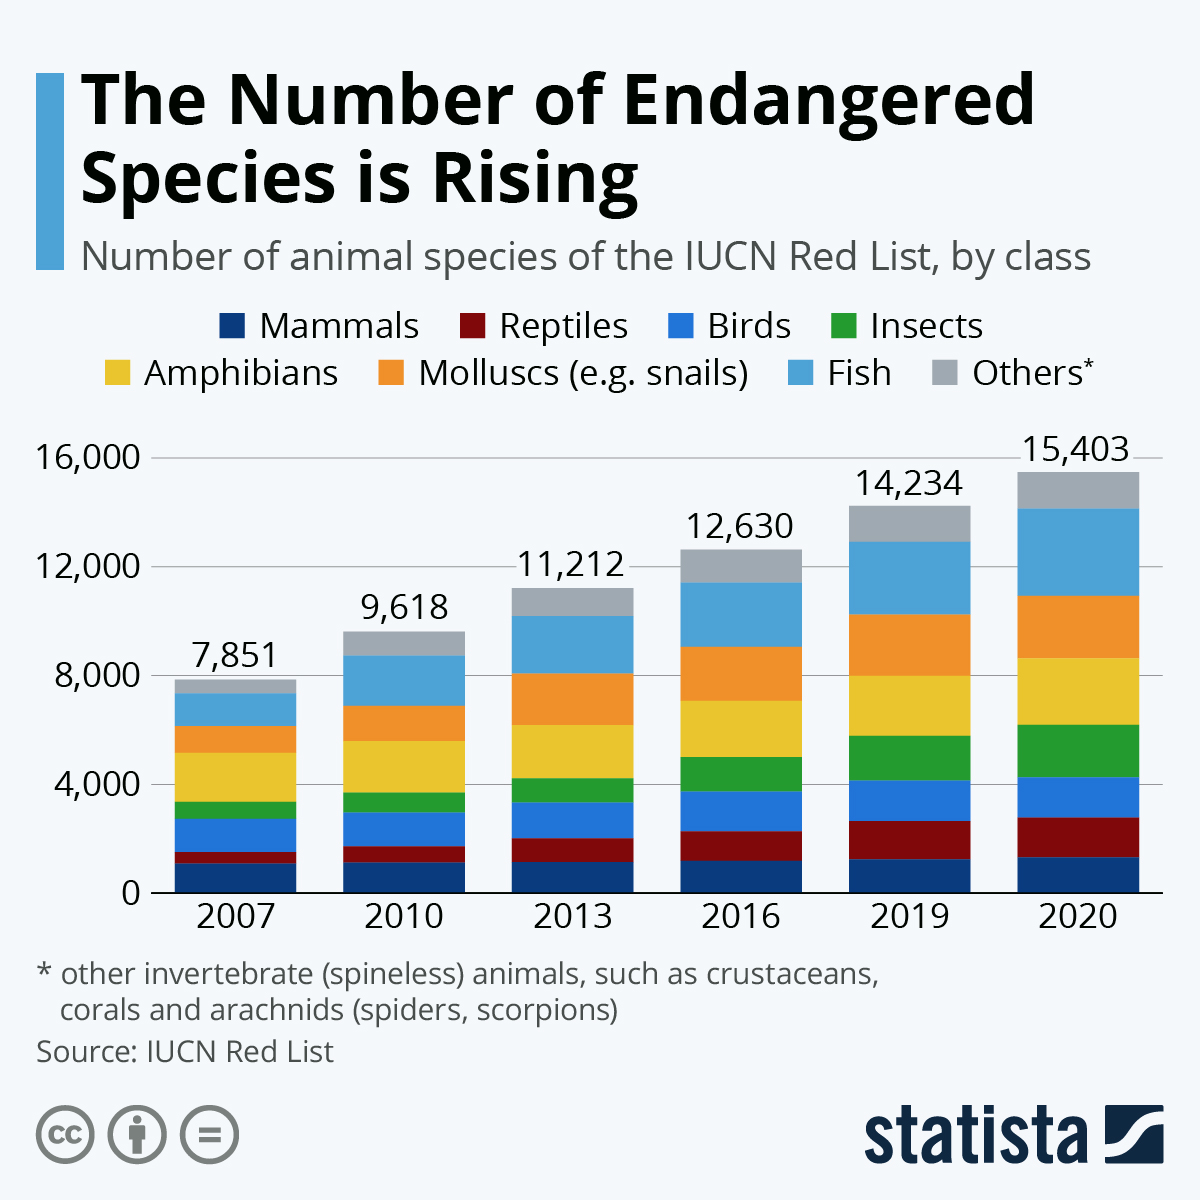 How many mammals species are under threat according to IUCN?